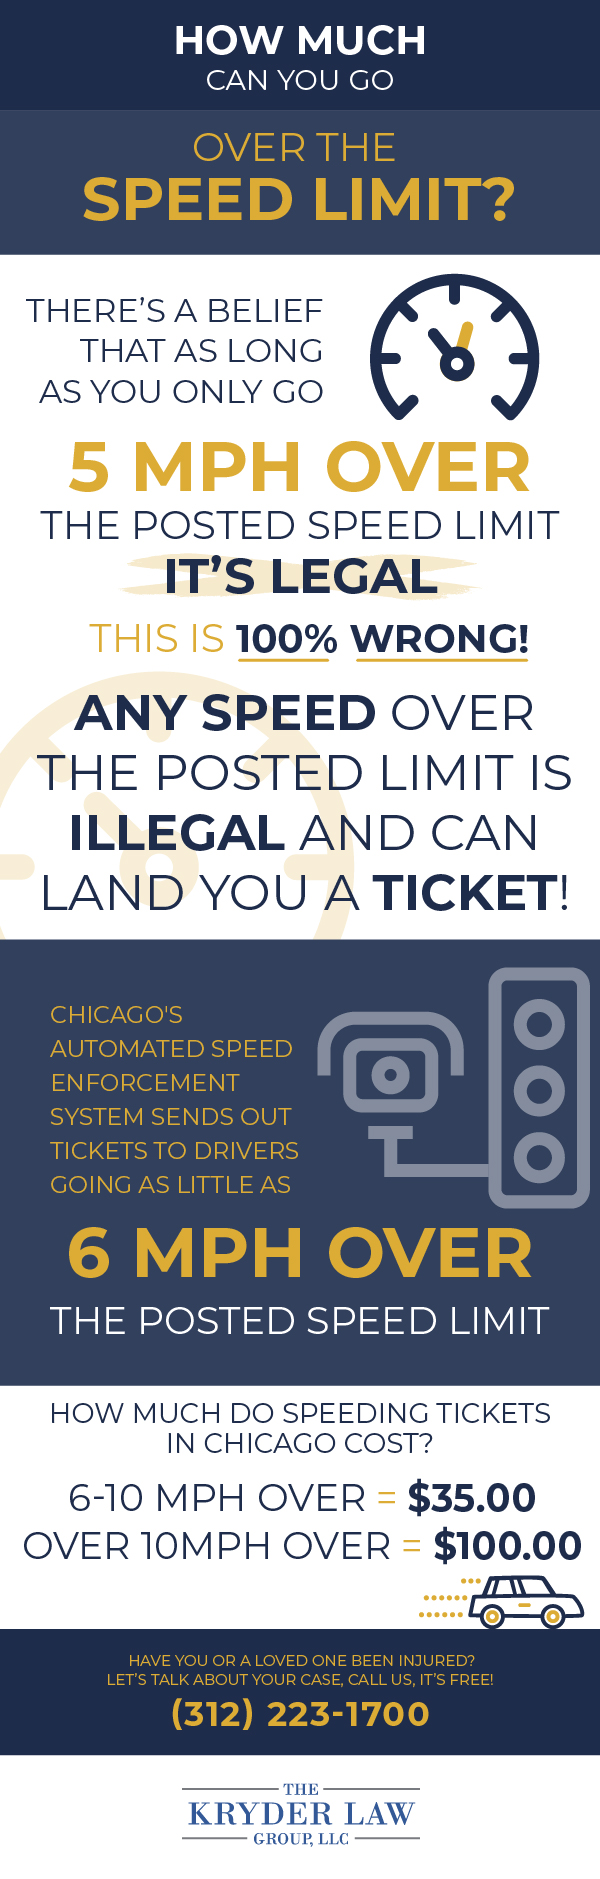 How Many MPH Can You Go Over the Speed Limit Infographic